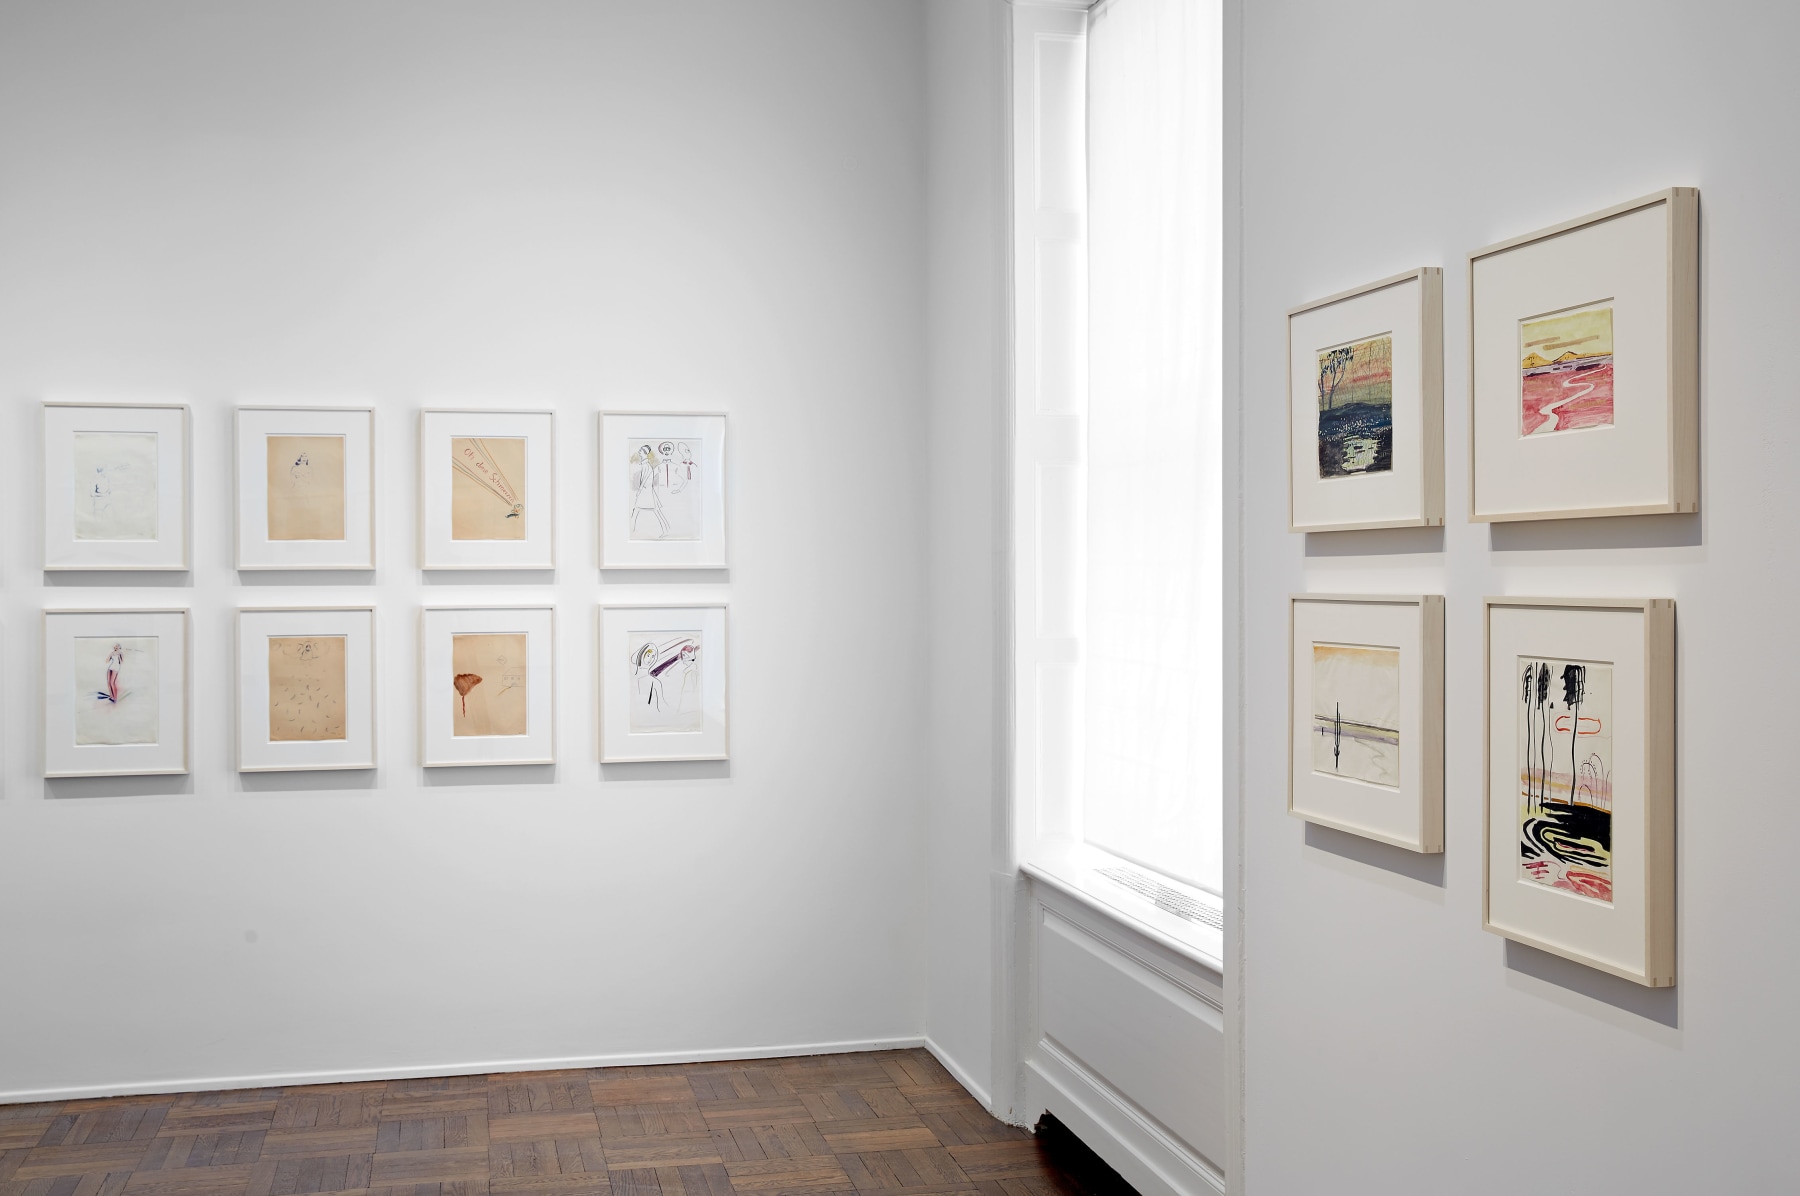 Sigmar Polke, Early Works on Paper, New York, 2014, Installation Image 5